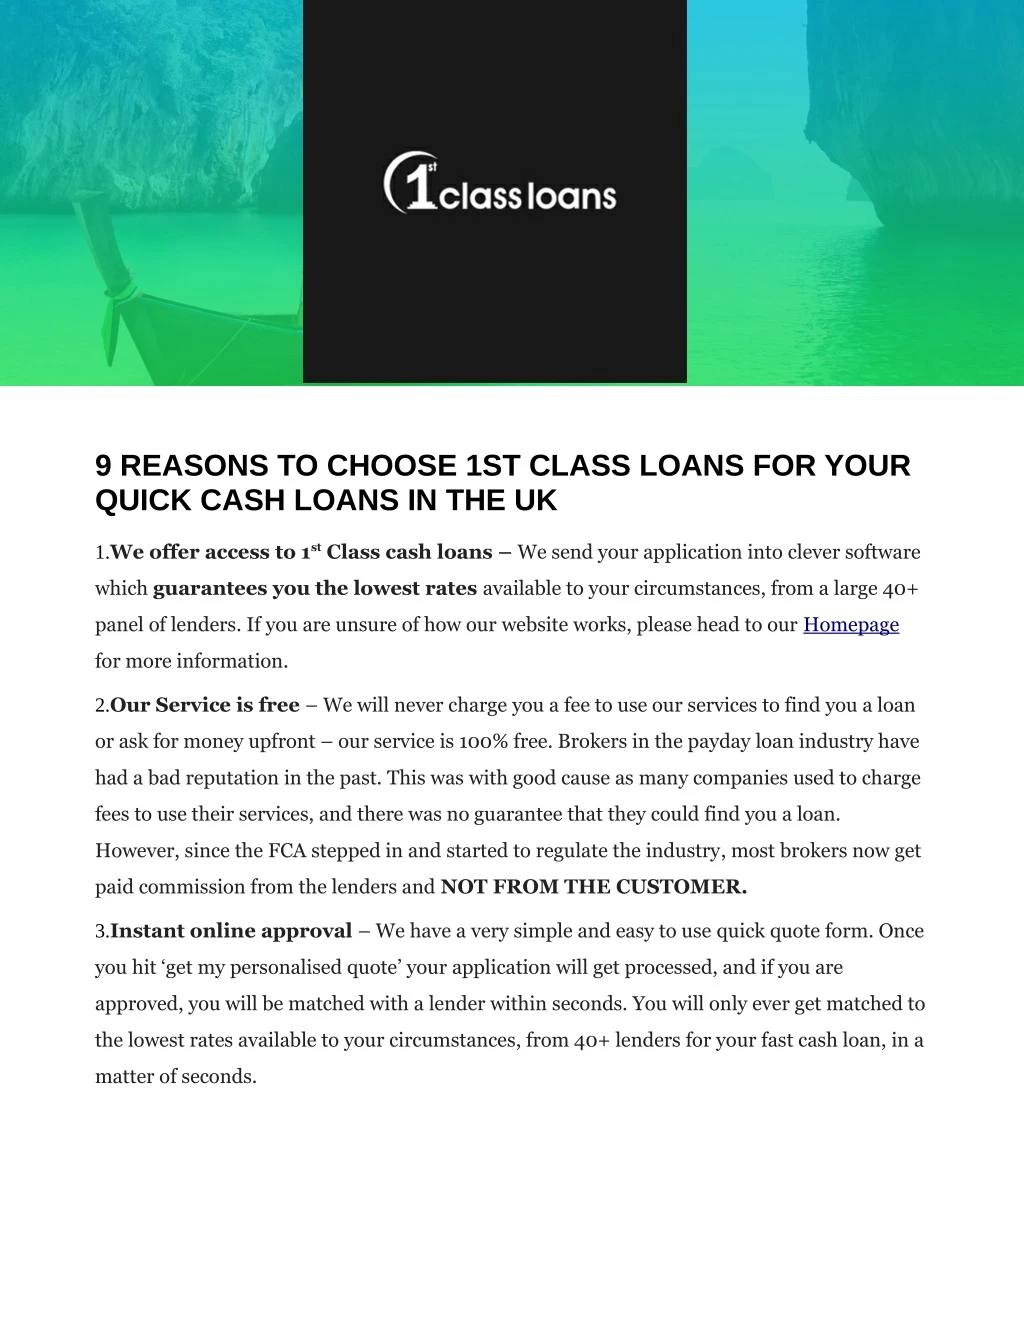 9 reasons to choose 1st class loans for your